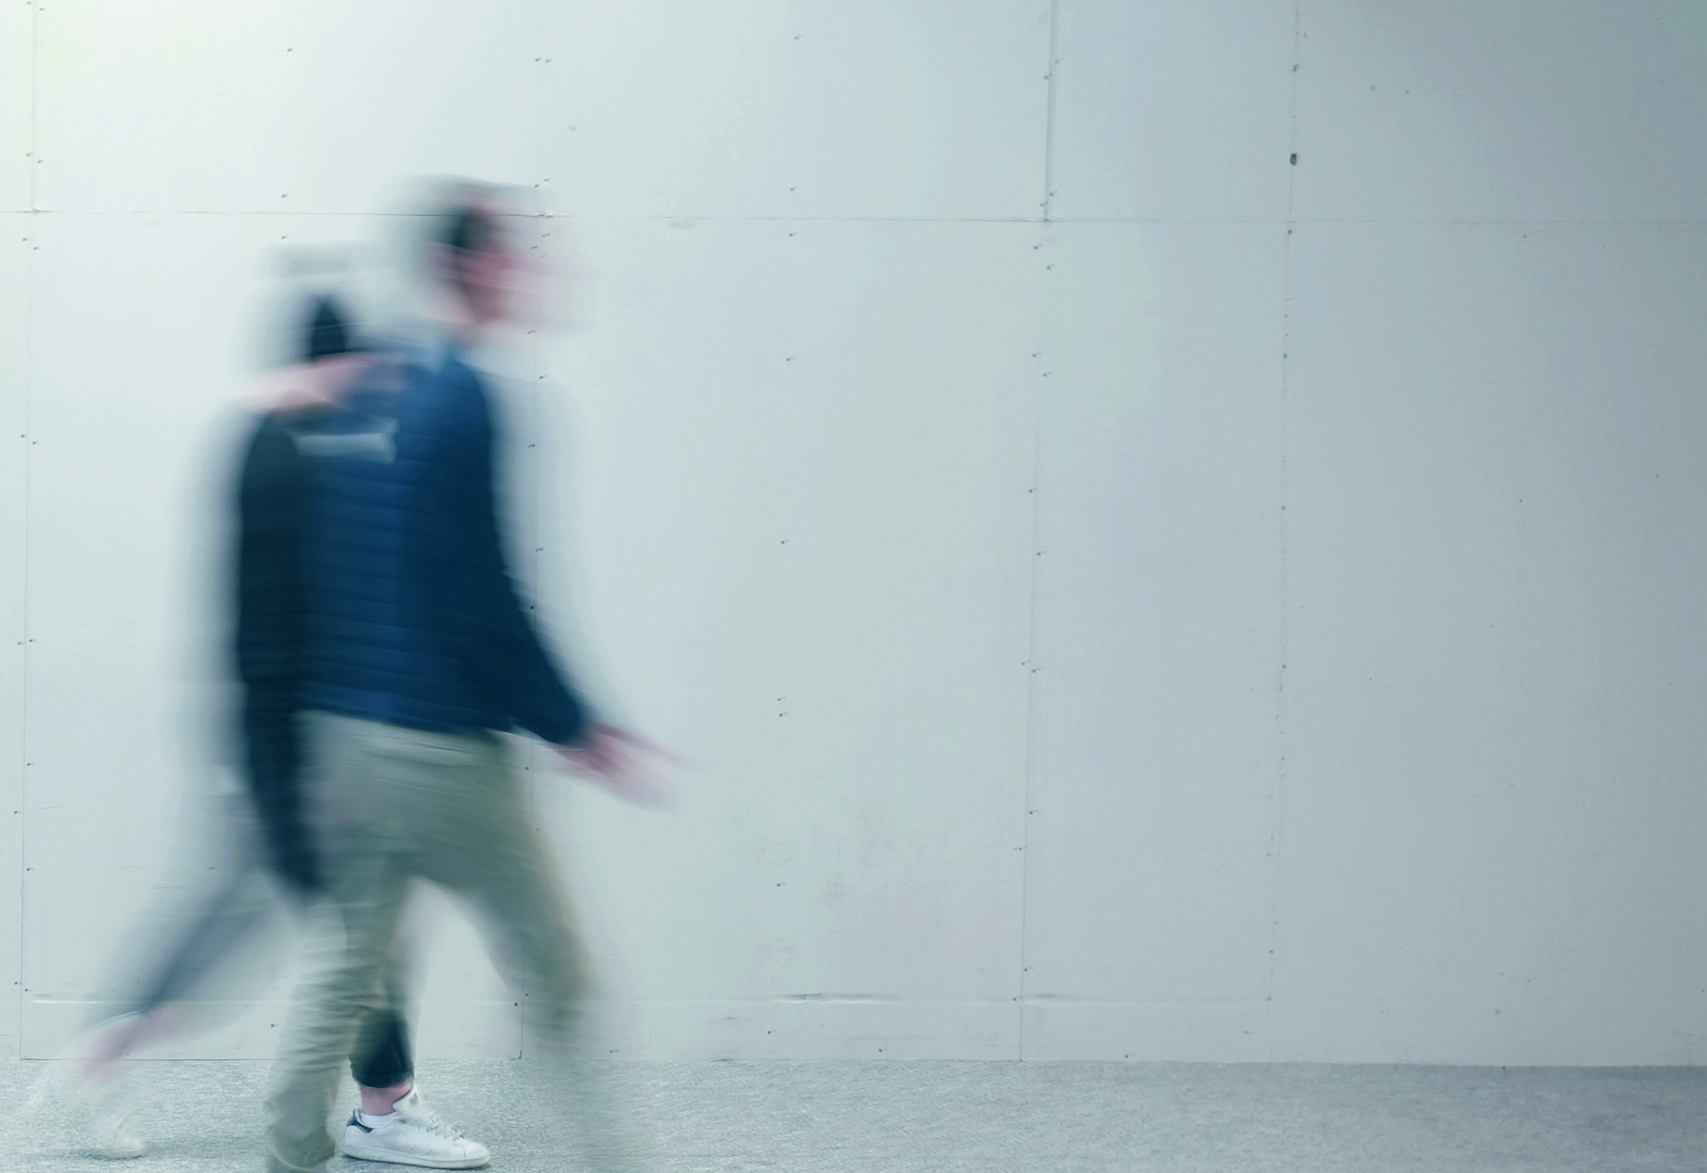 Blurred image of two people crossing a street